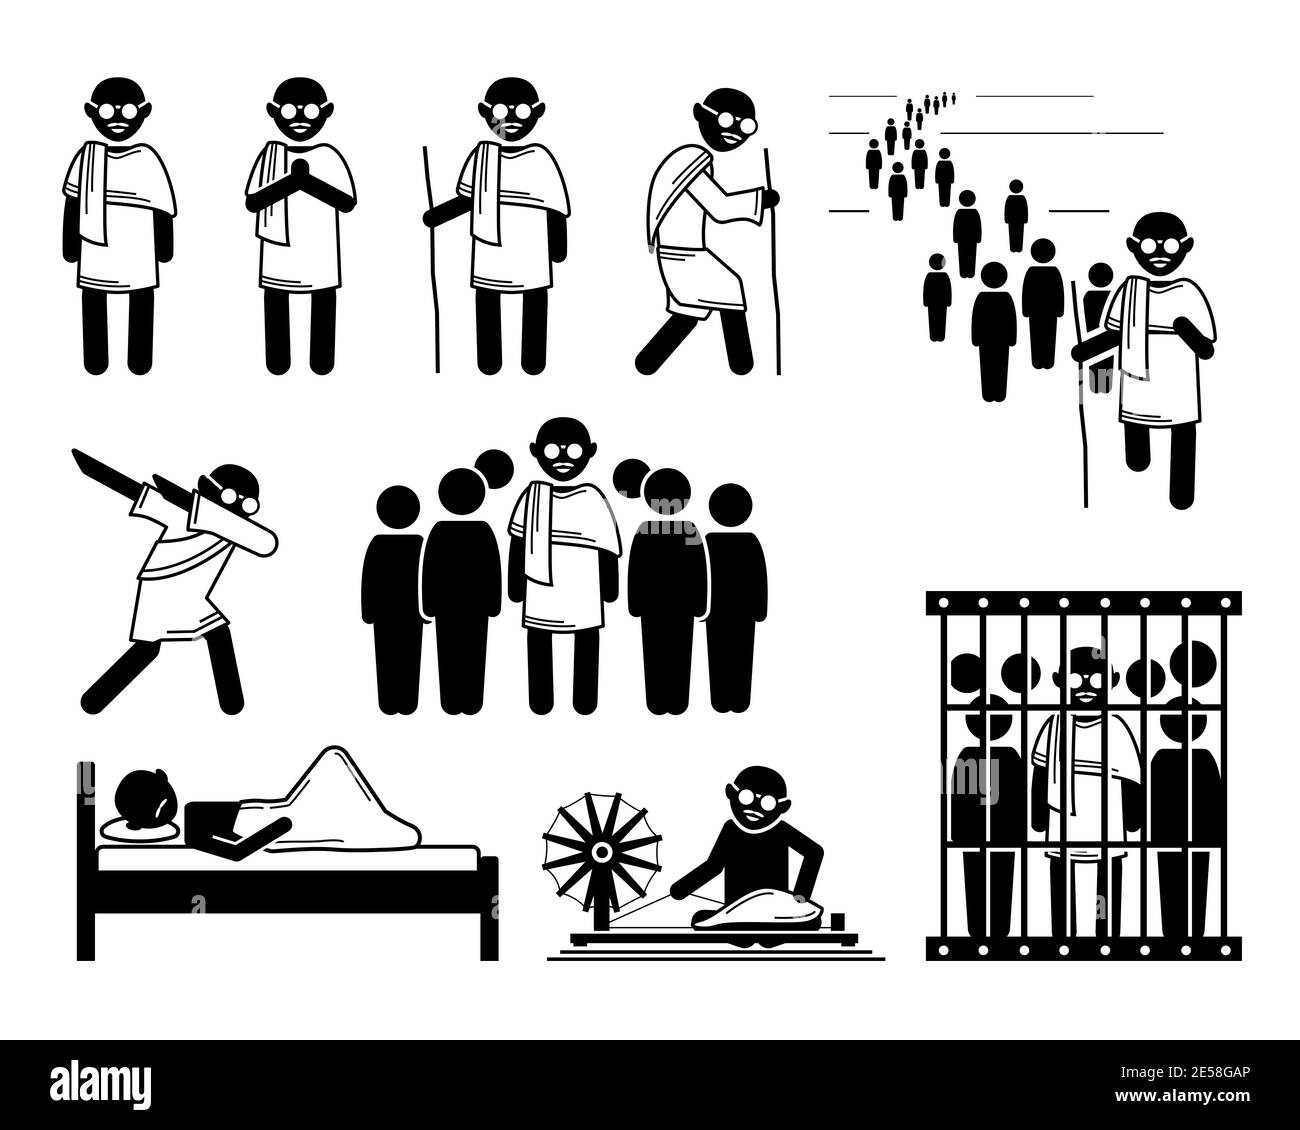 Mahatma Gandhi stick figures icons set. Vector illustrations of important key events of Mahatma Gandhi during his non violent protest in India. Stock Vector